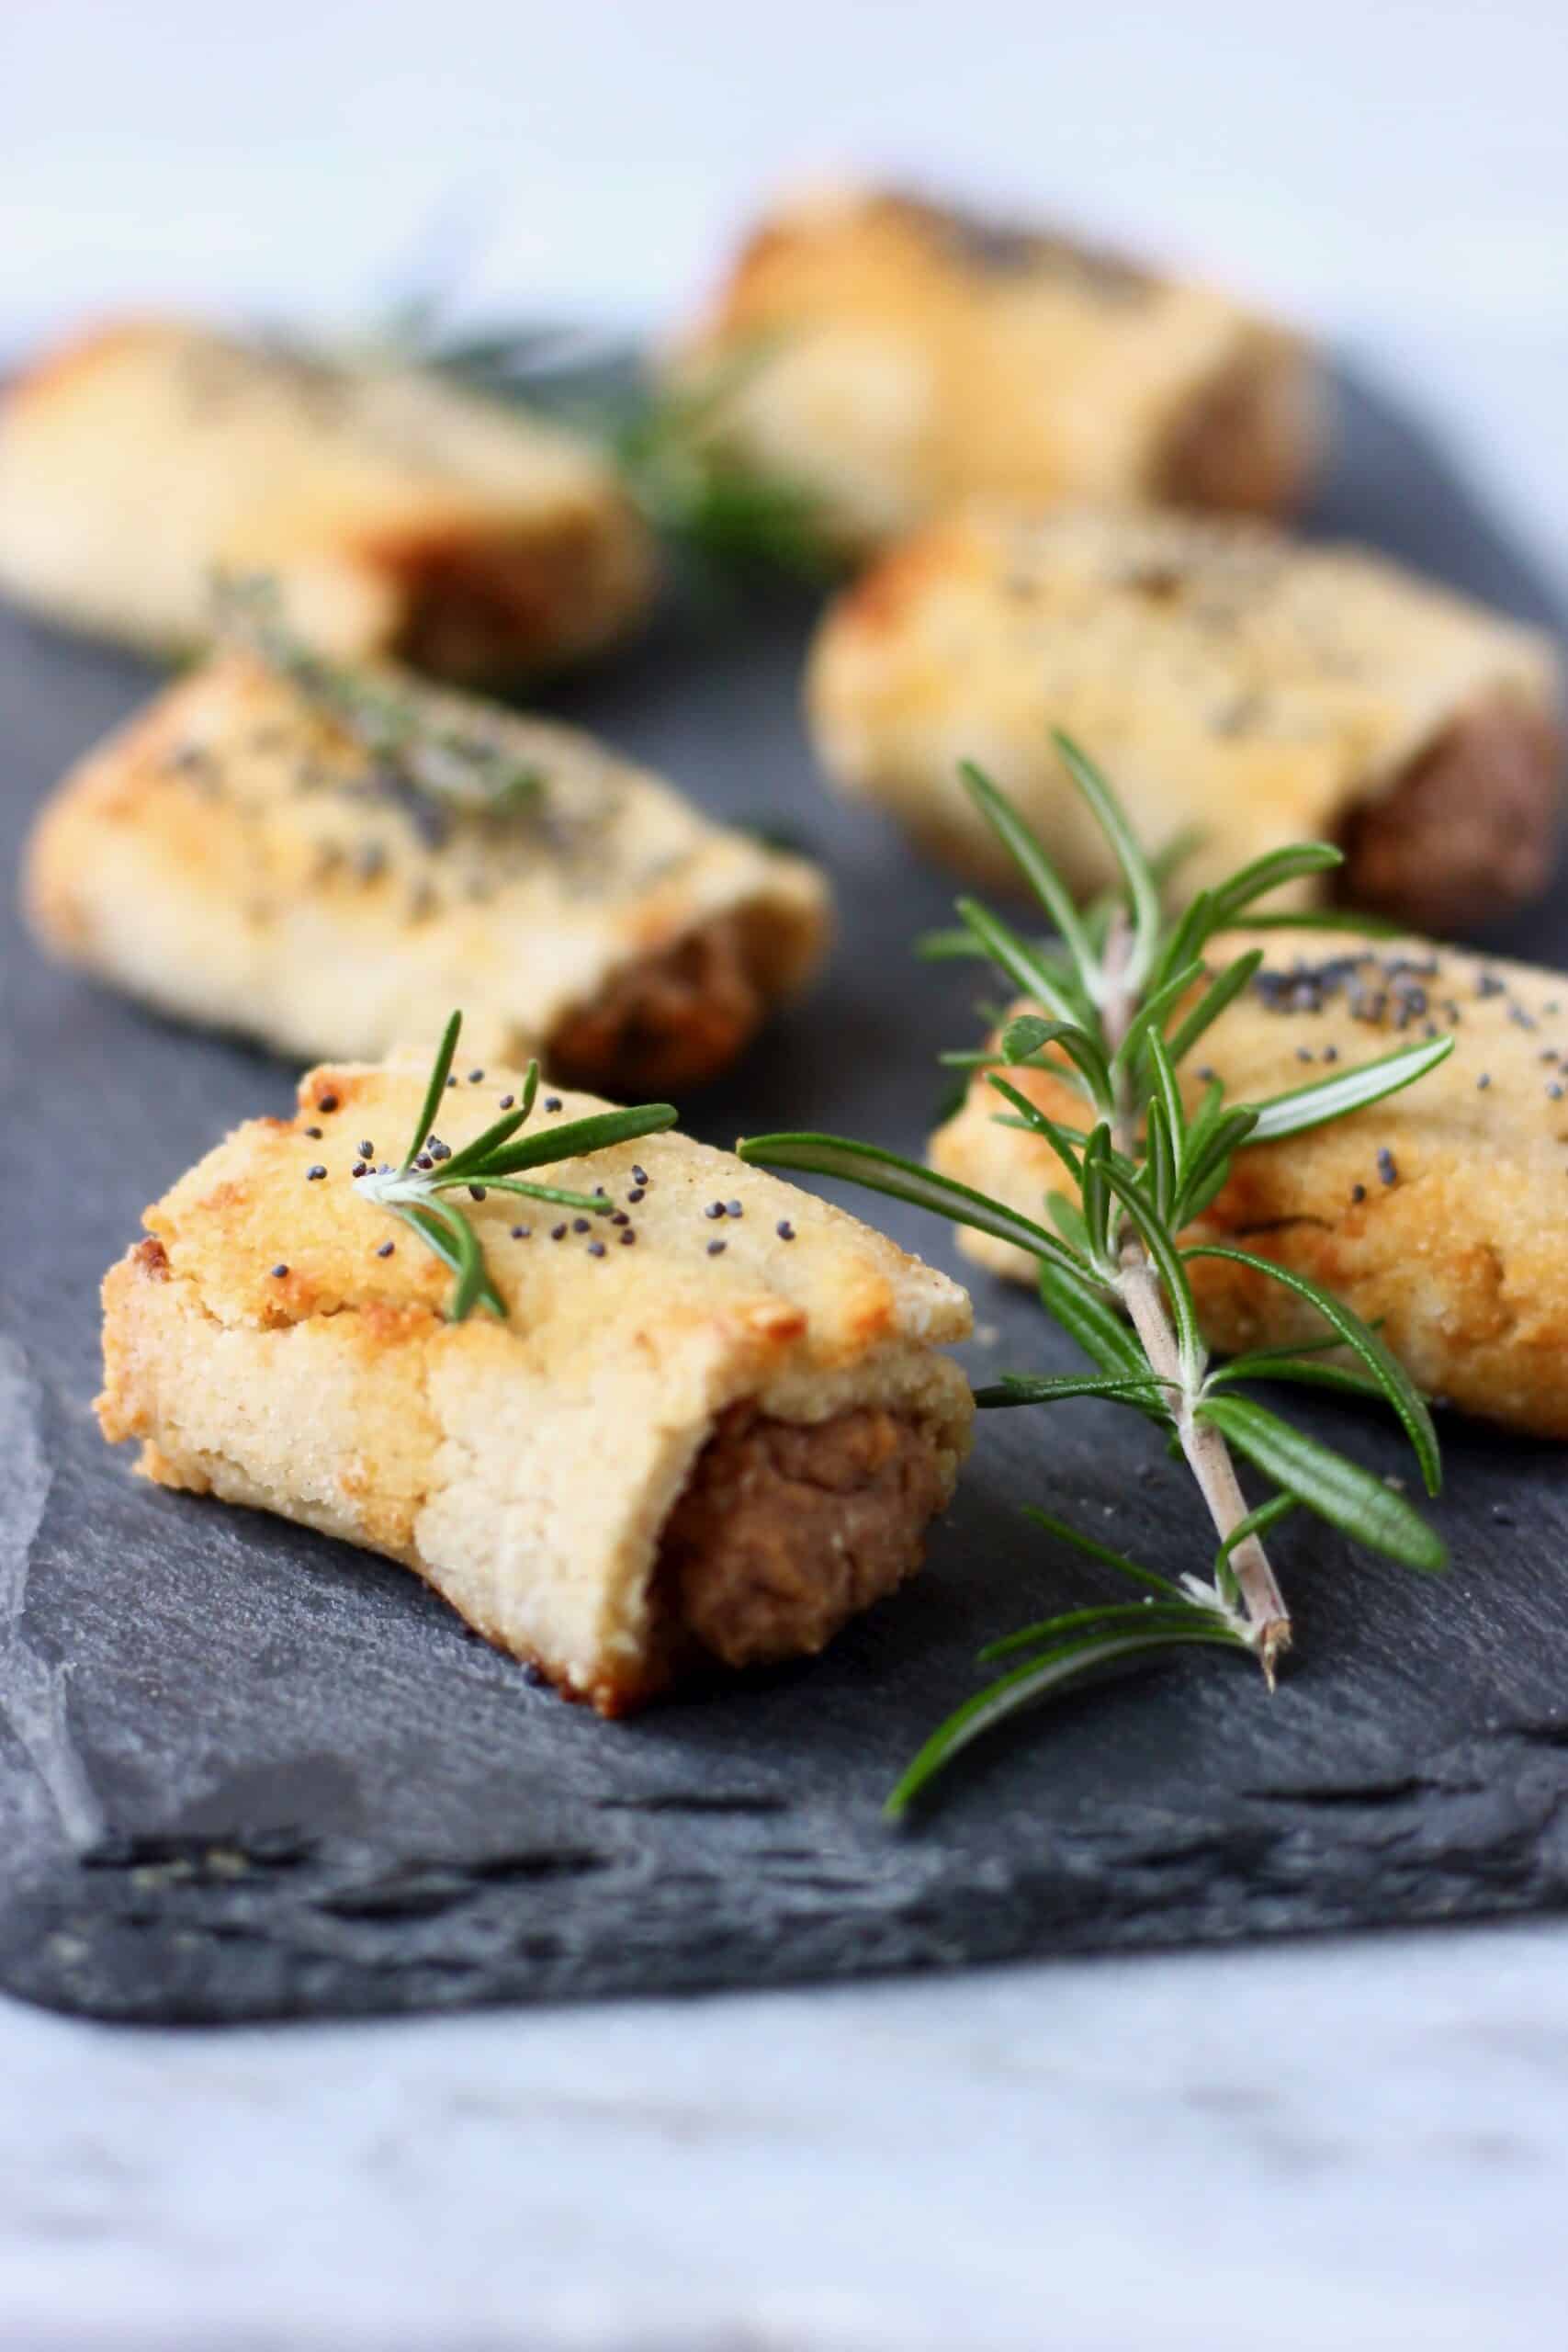 Six cooked sausage rolls sprinkled with poppy seeds on a black slab decorated with sprigs of rosemary